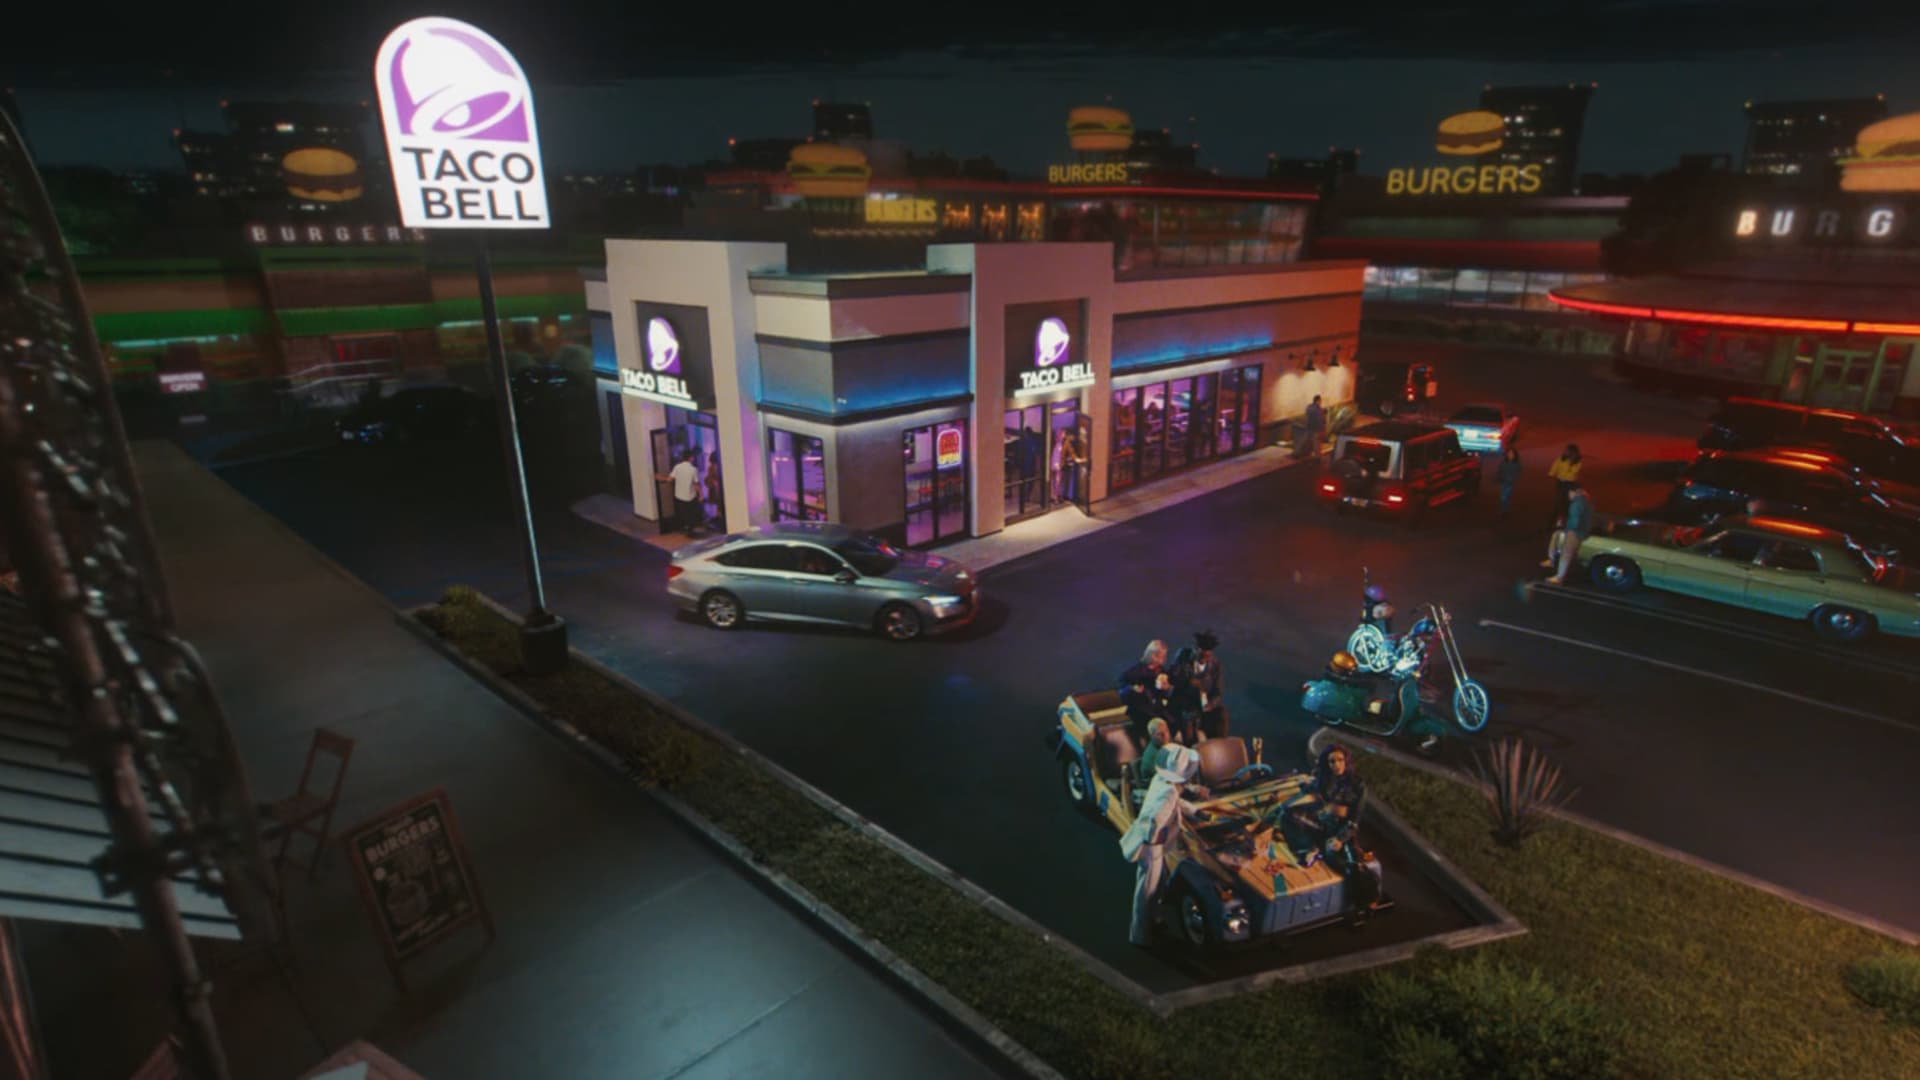 A scene from Taco Bell's Super Bowl ad